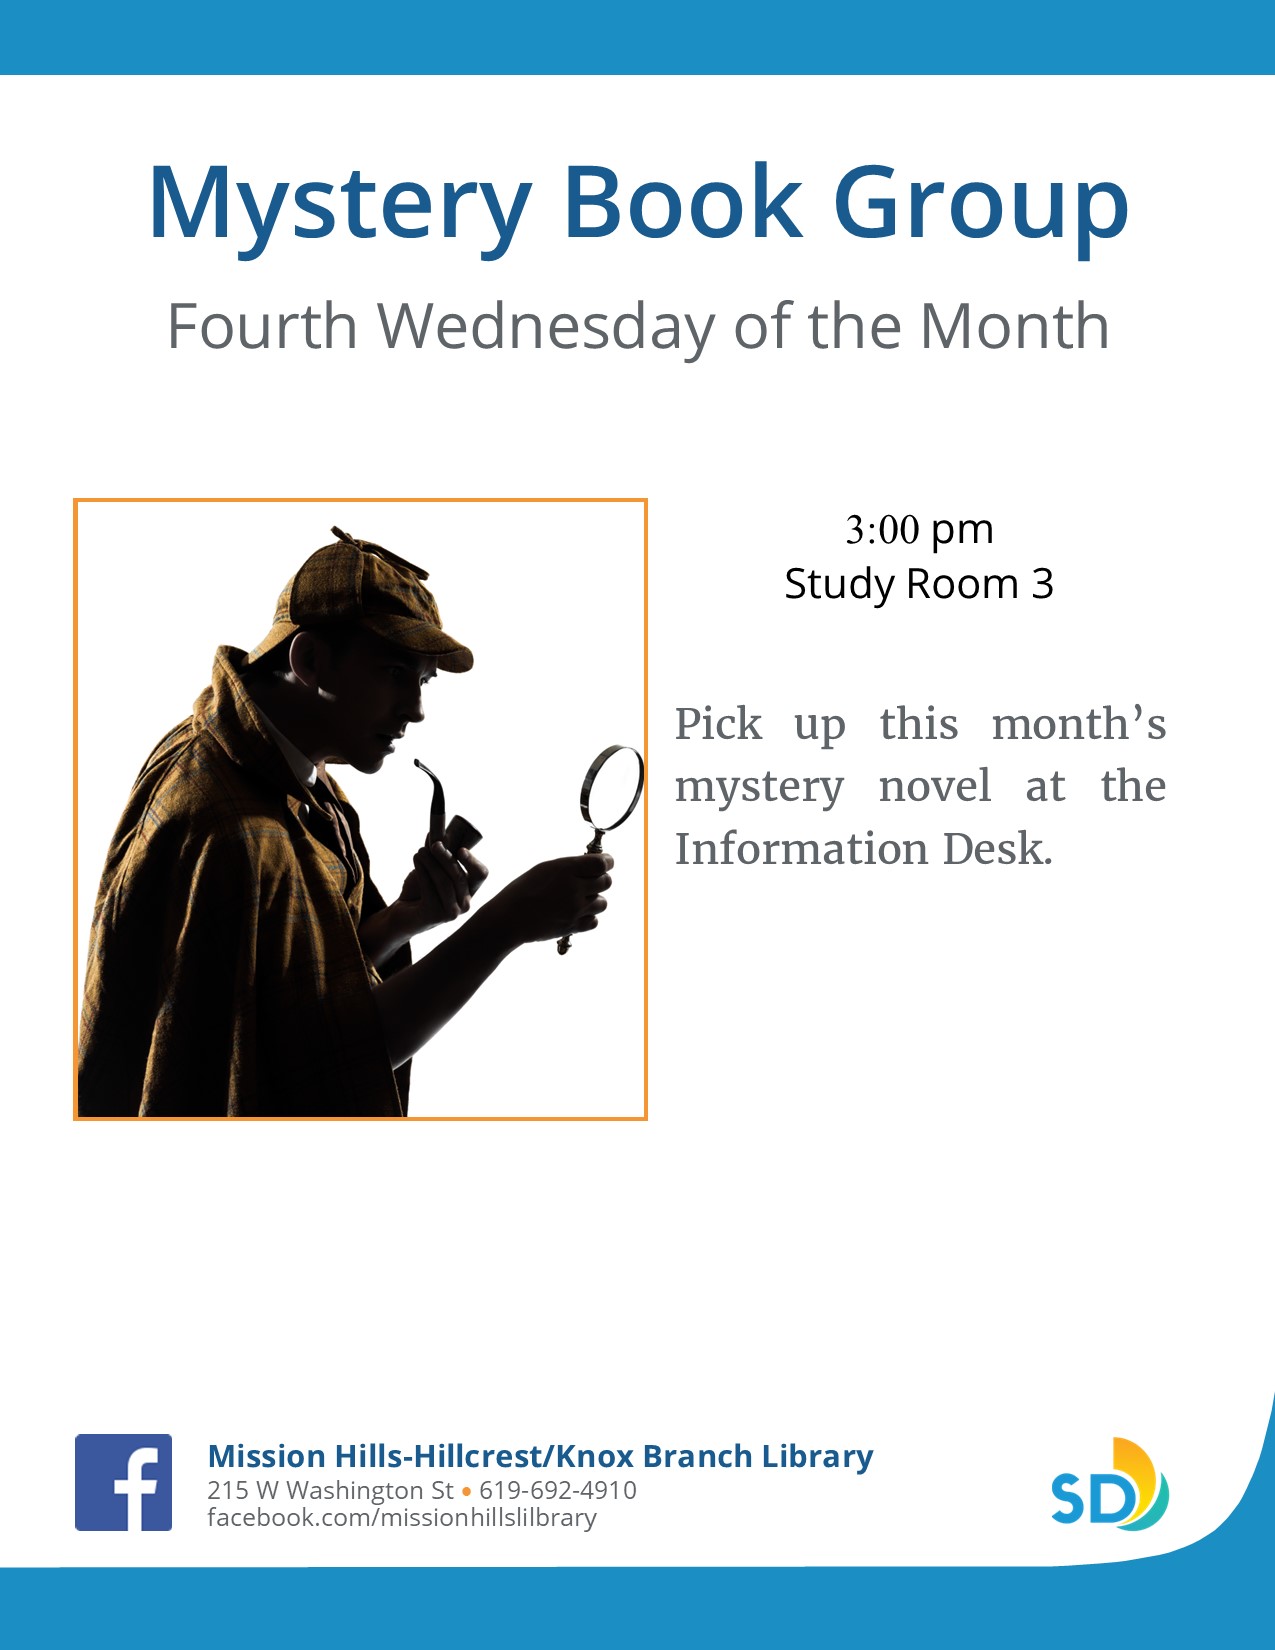 Book club flyer with Sherlock Holmes image